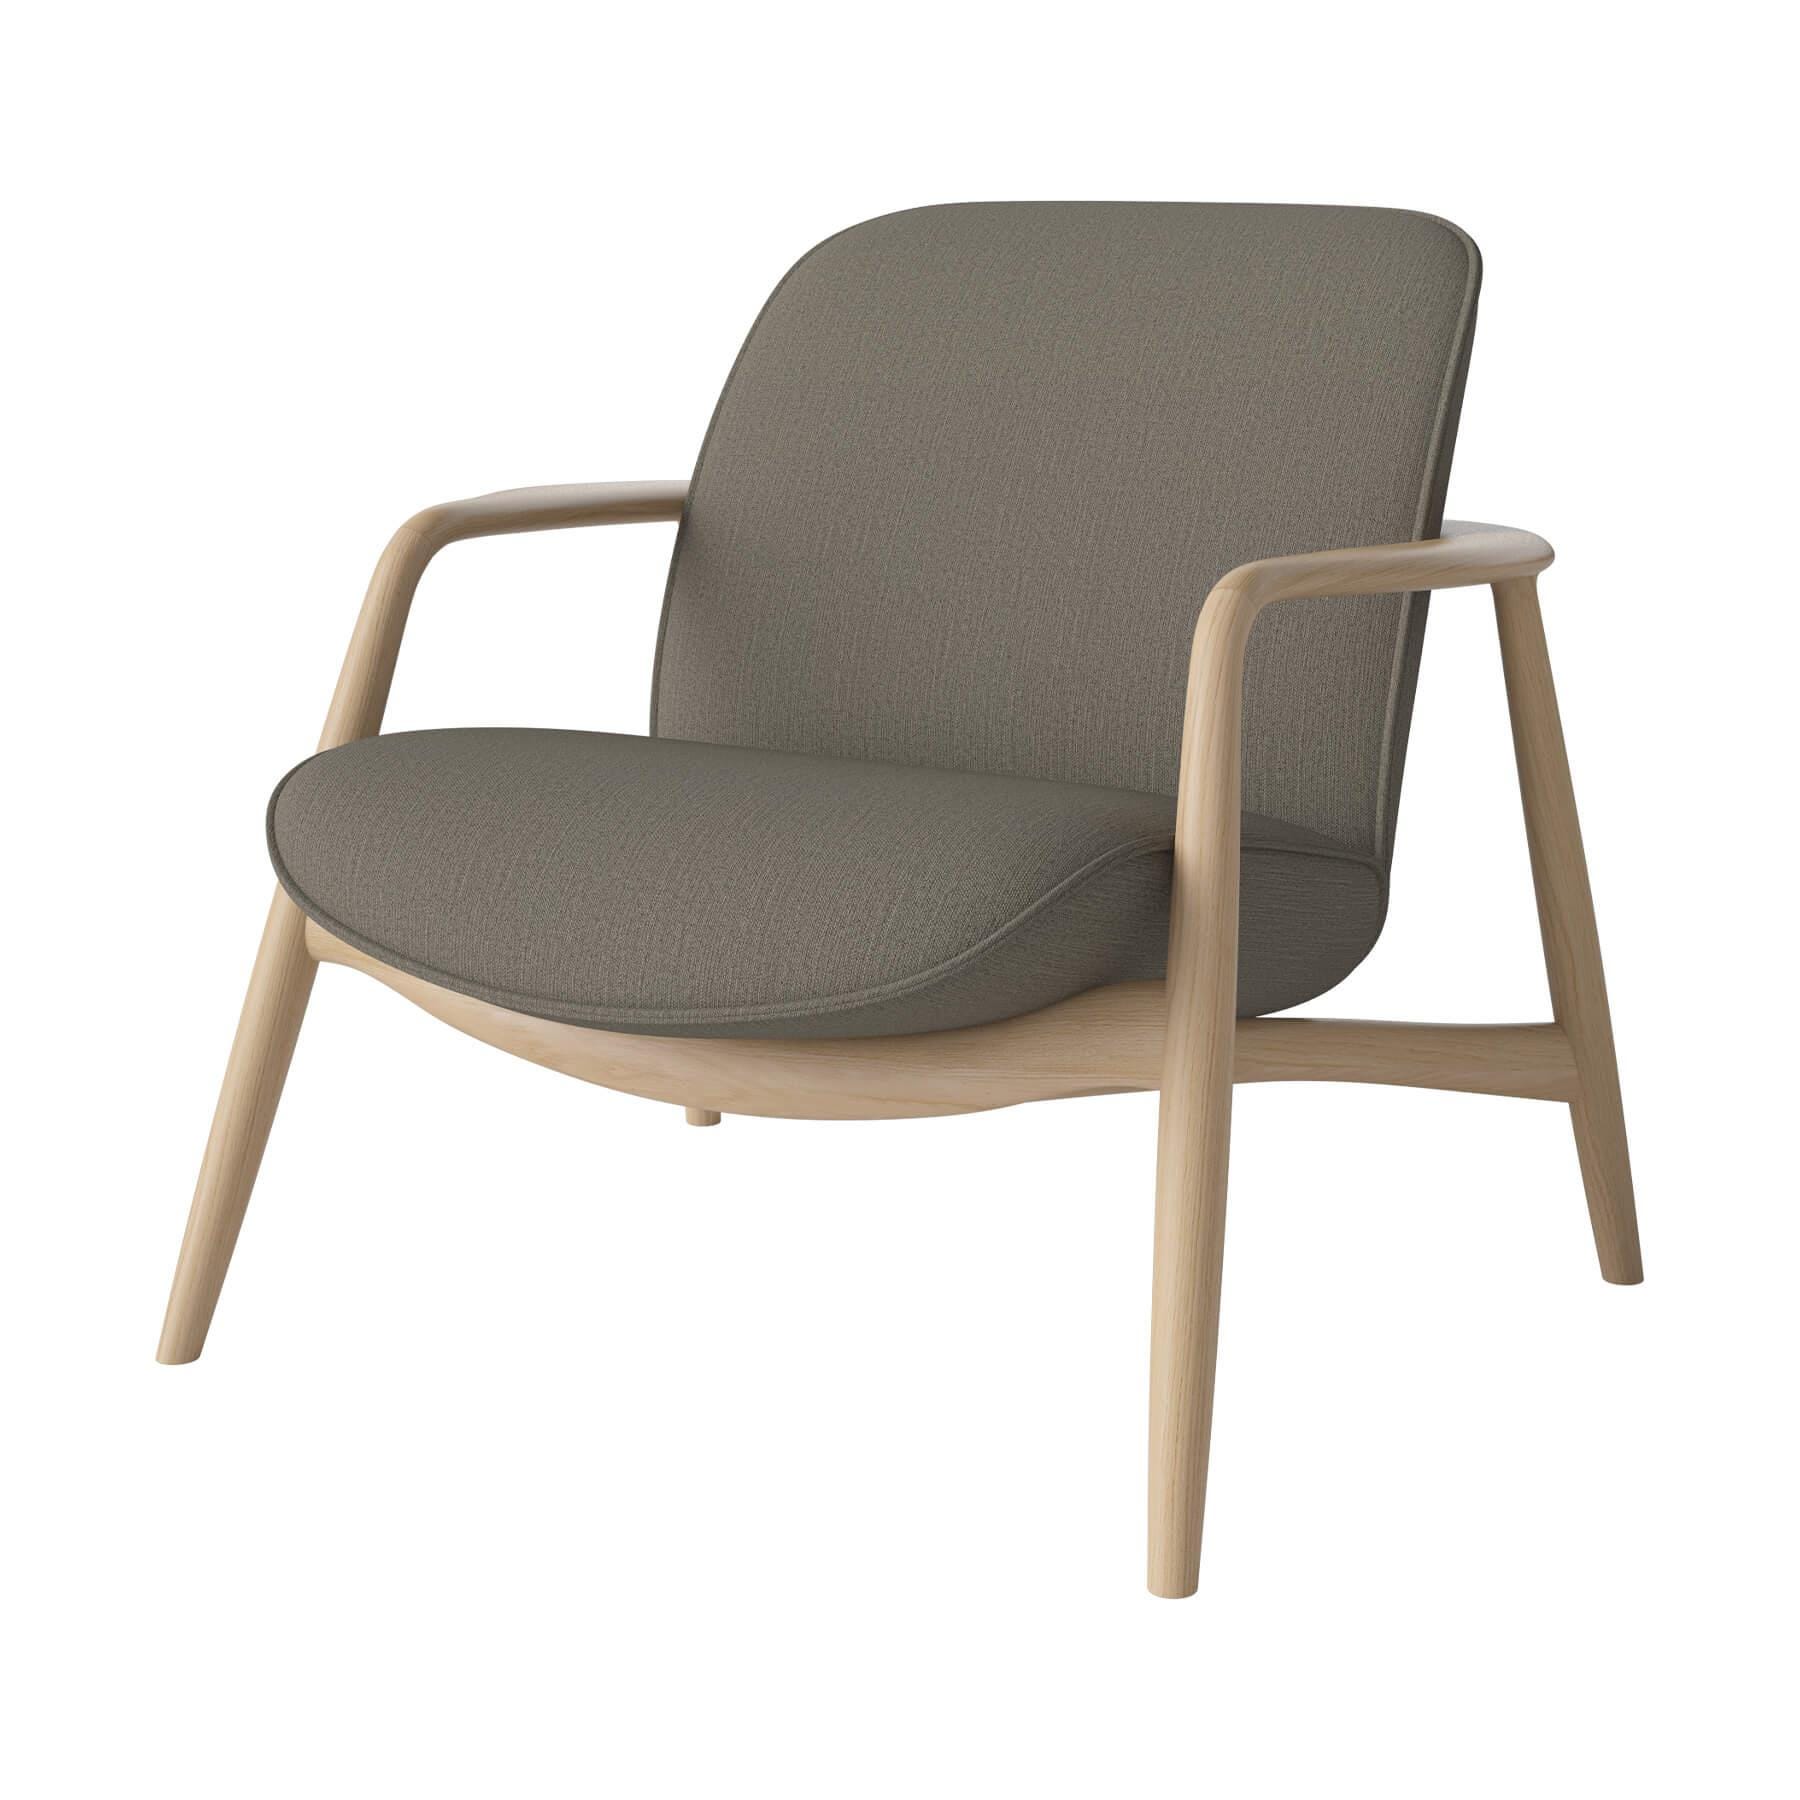 Bolia Bowie Armchair White Oiled Oak Baize Green Designer Furniture From Holloways Of Ludlow